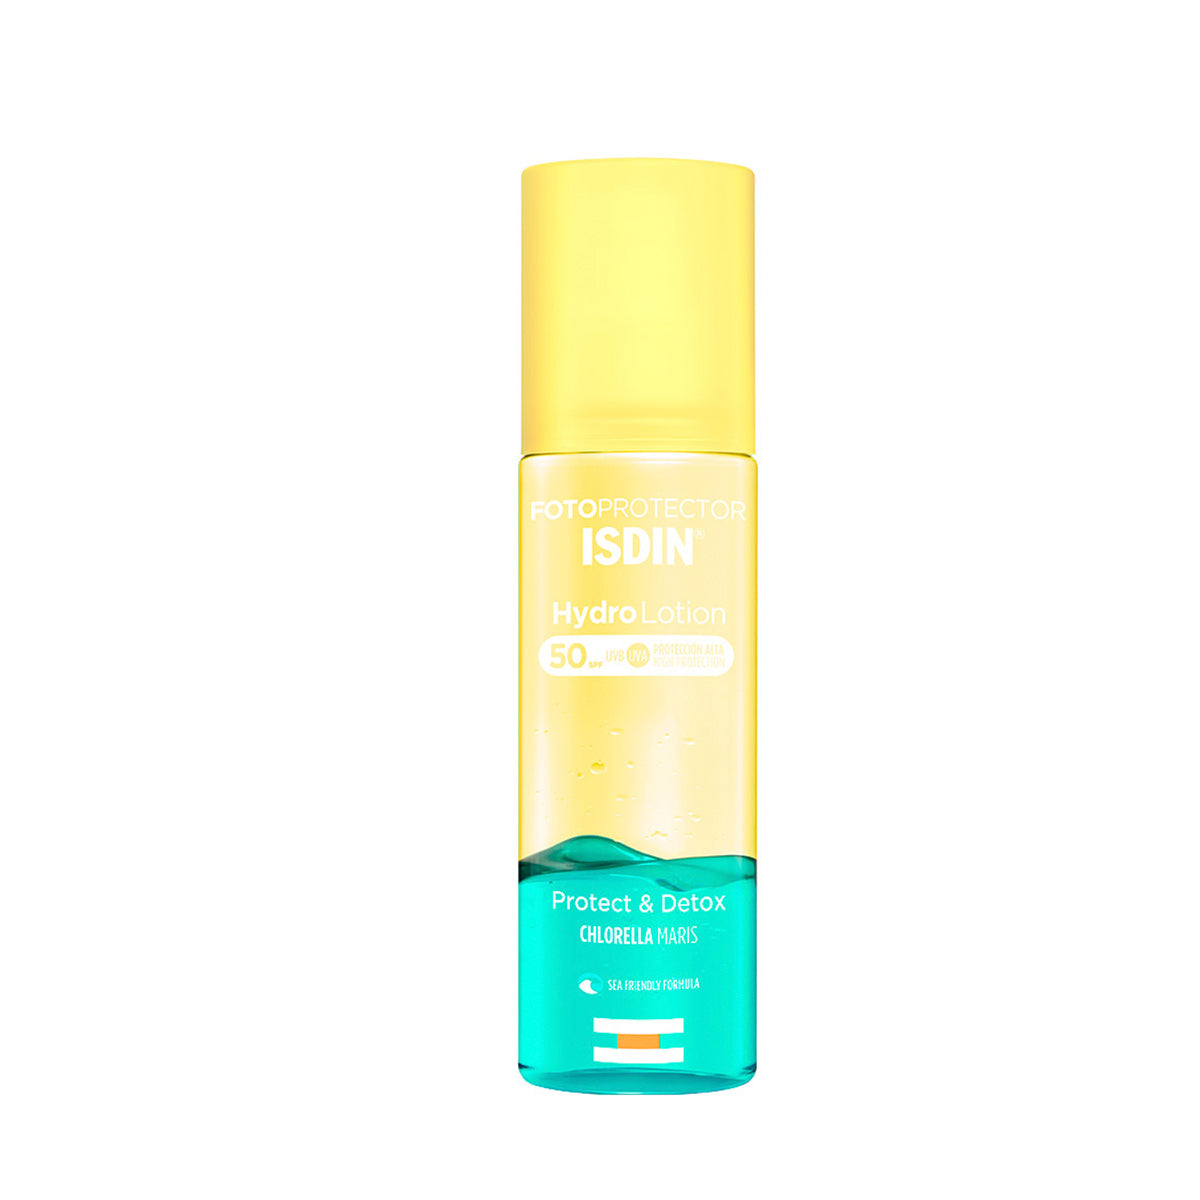 ISDIN Fotoprotector HydrOLotion SPF 50+